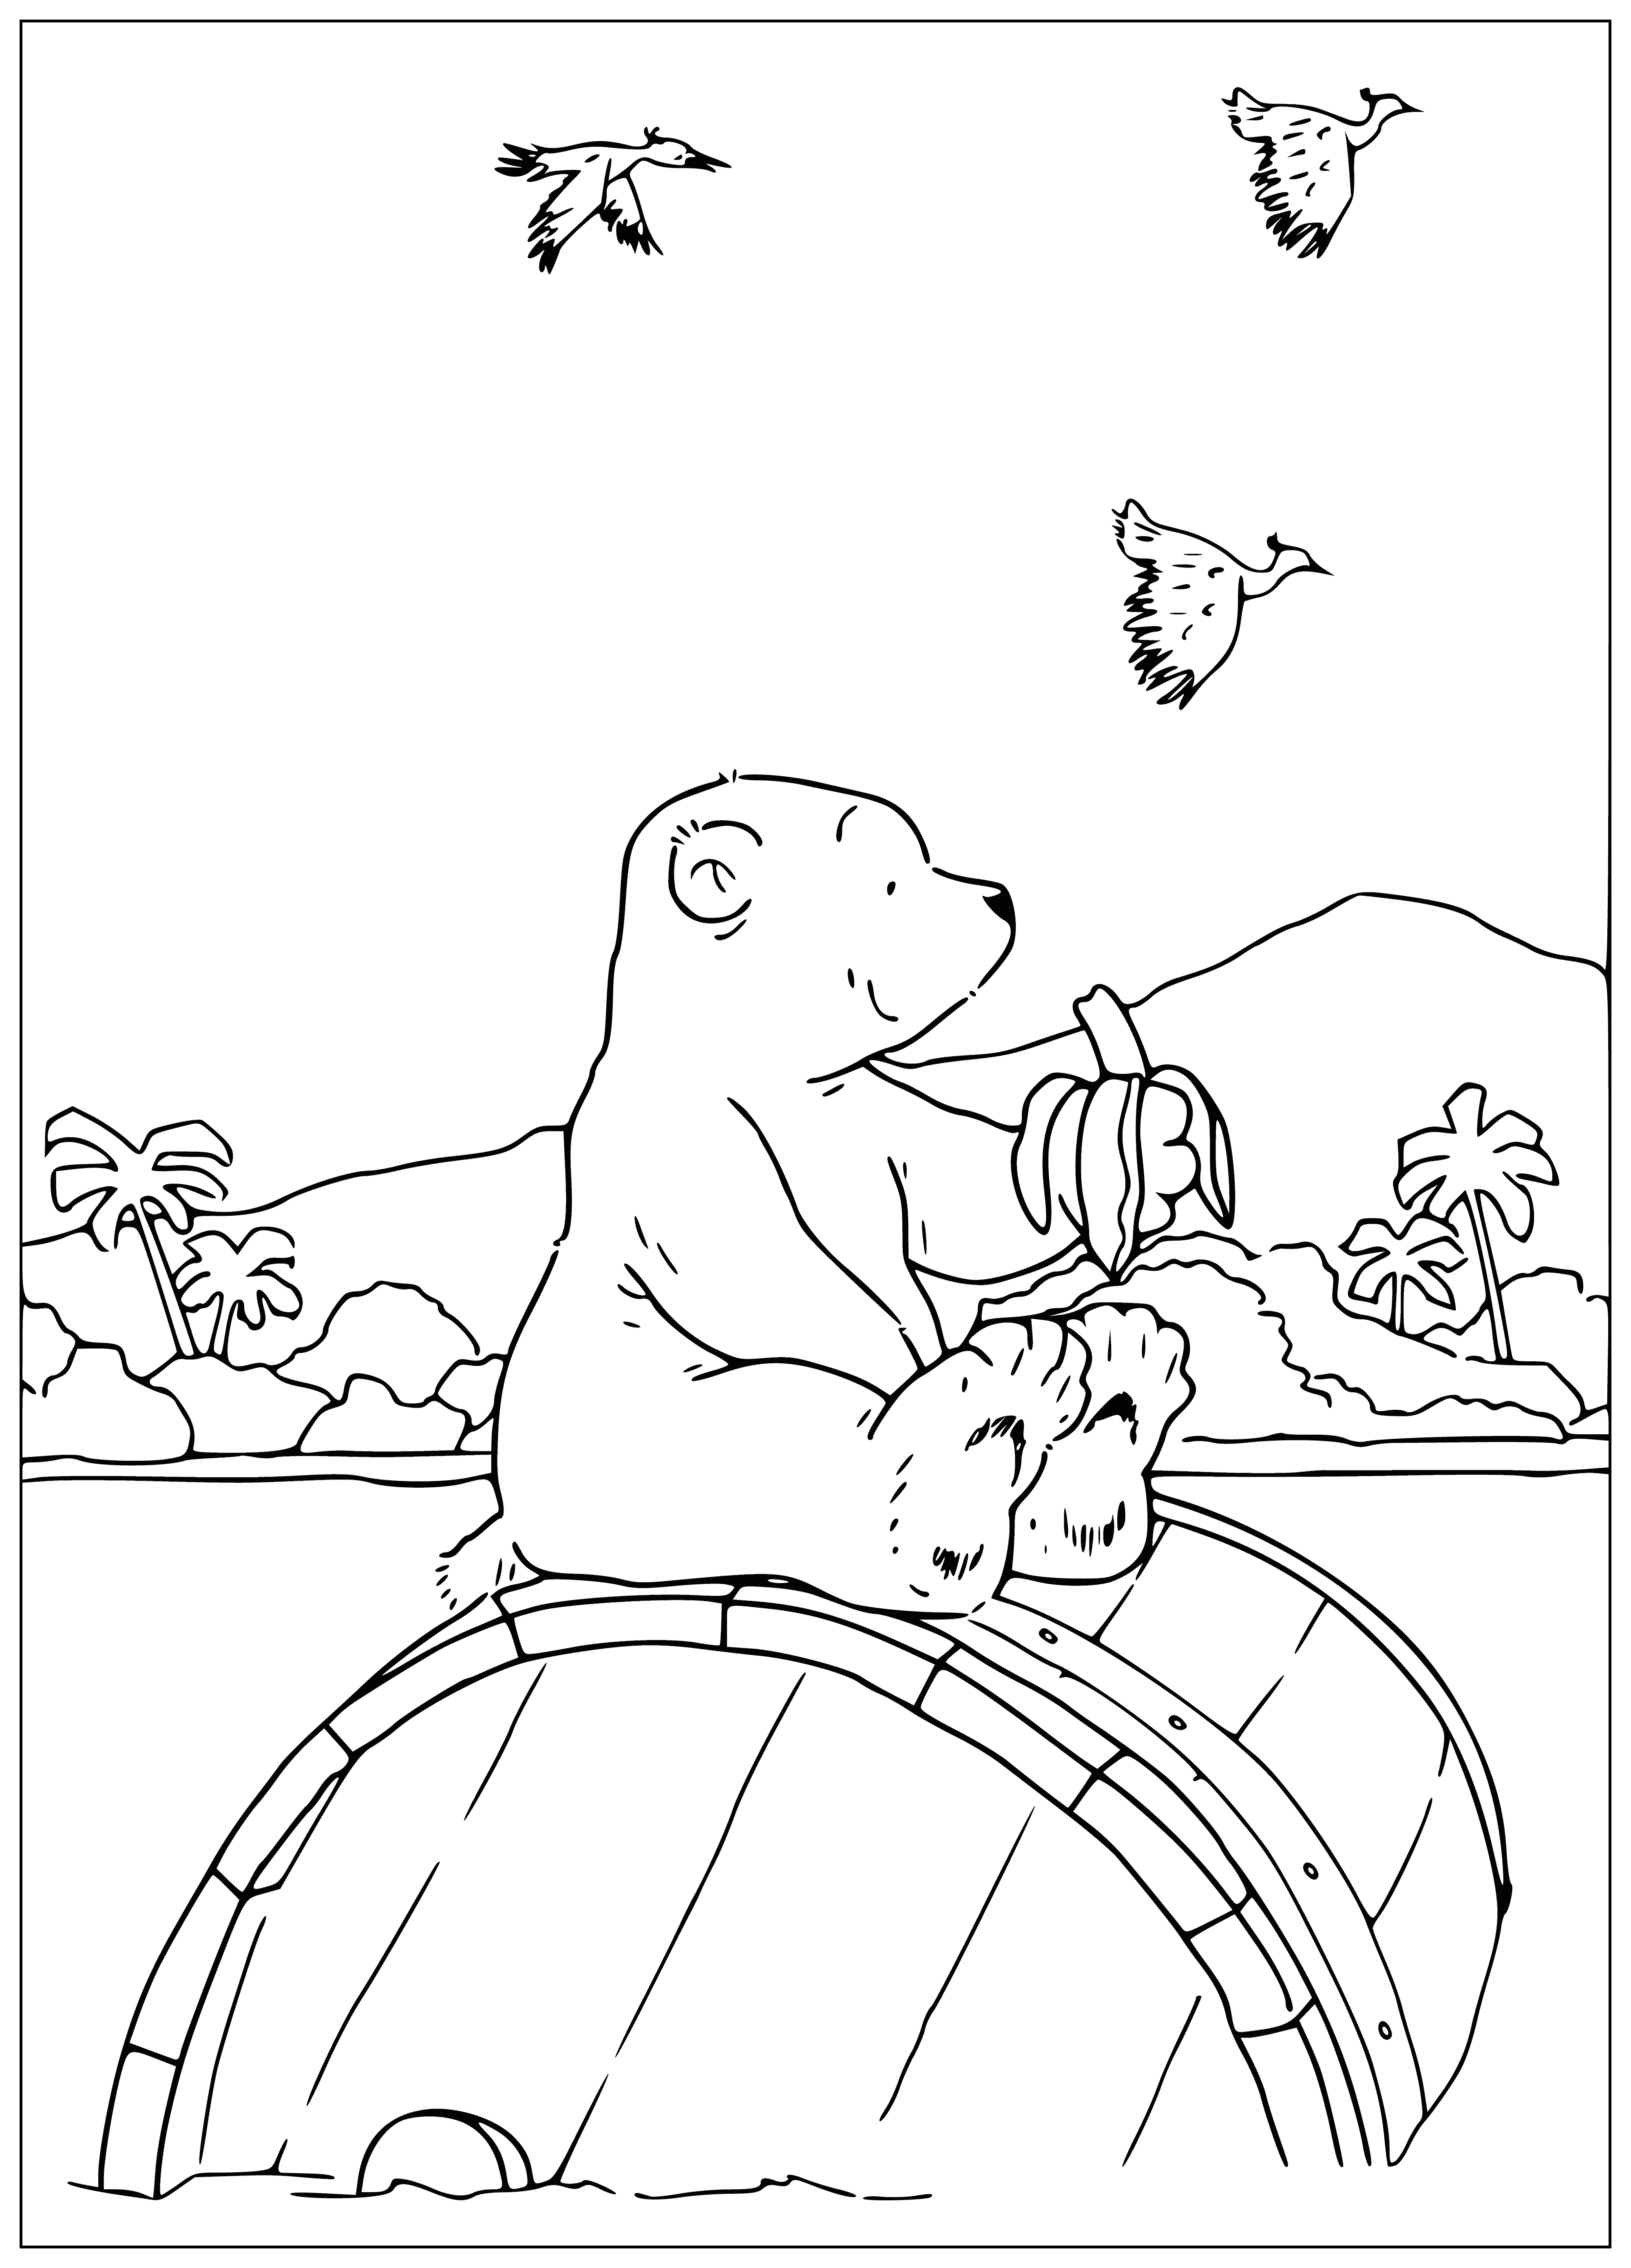 coloring page: Lars, a little polar bear, swims on a barrel wearing a red life jacket & fishing rod in mouth. Behind, a small ice floe with fish.